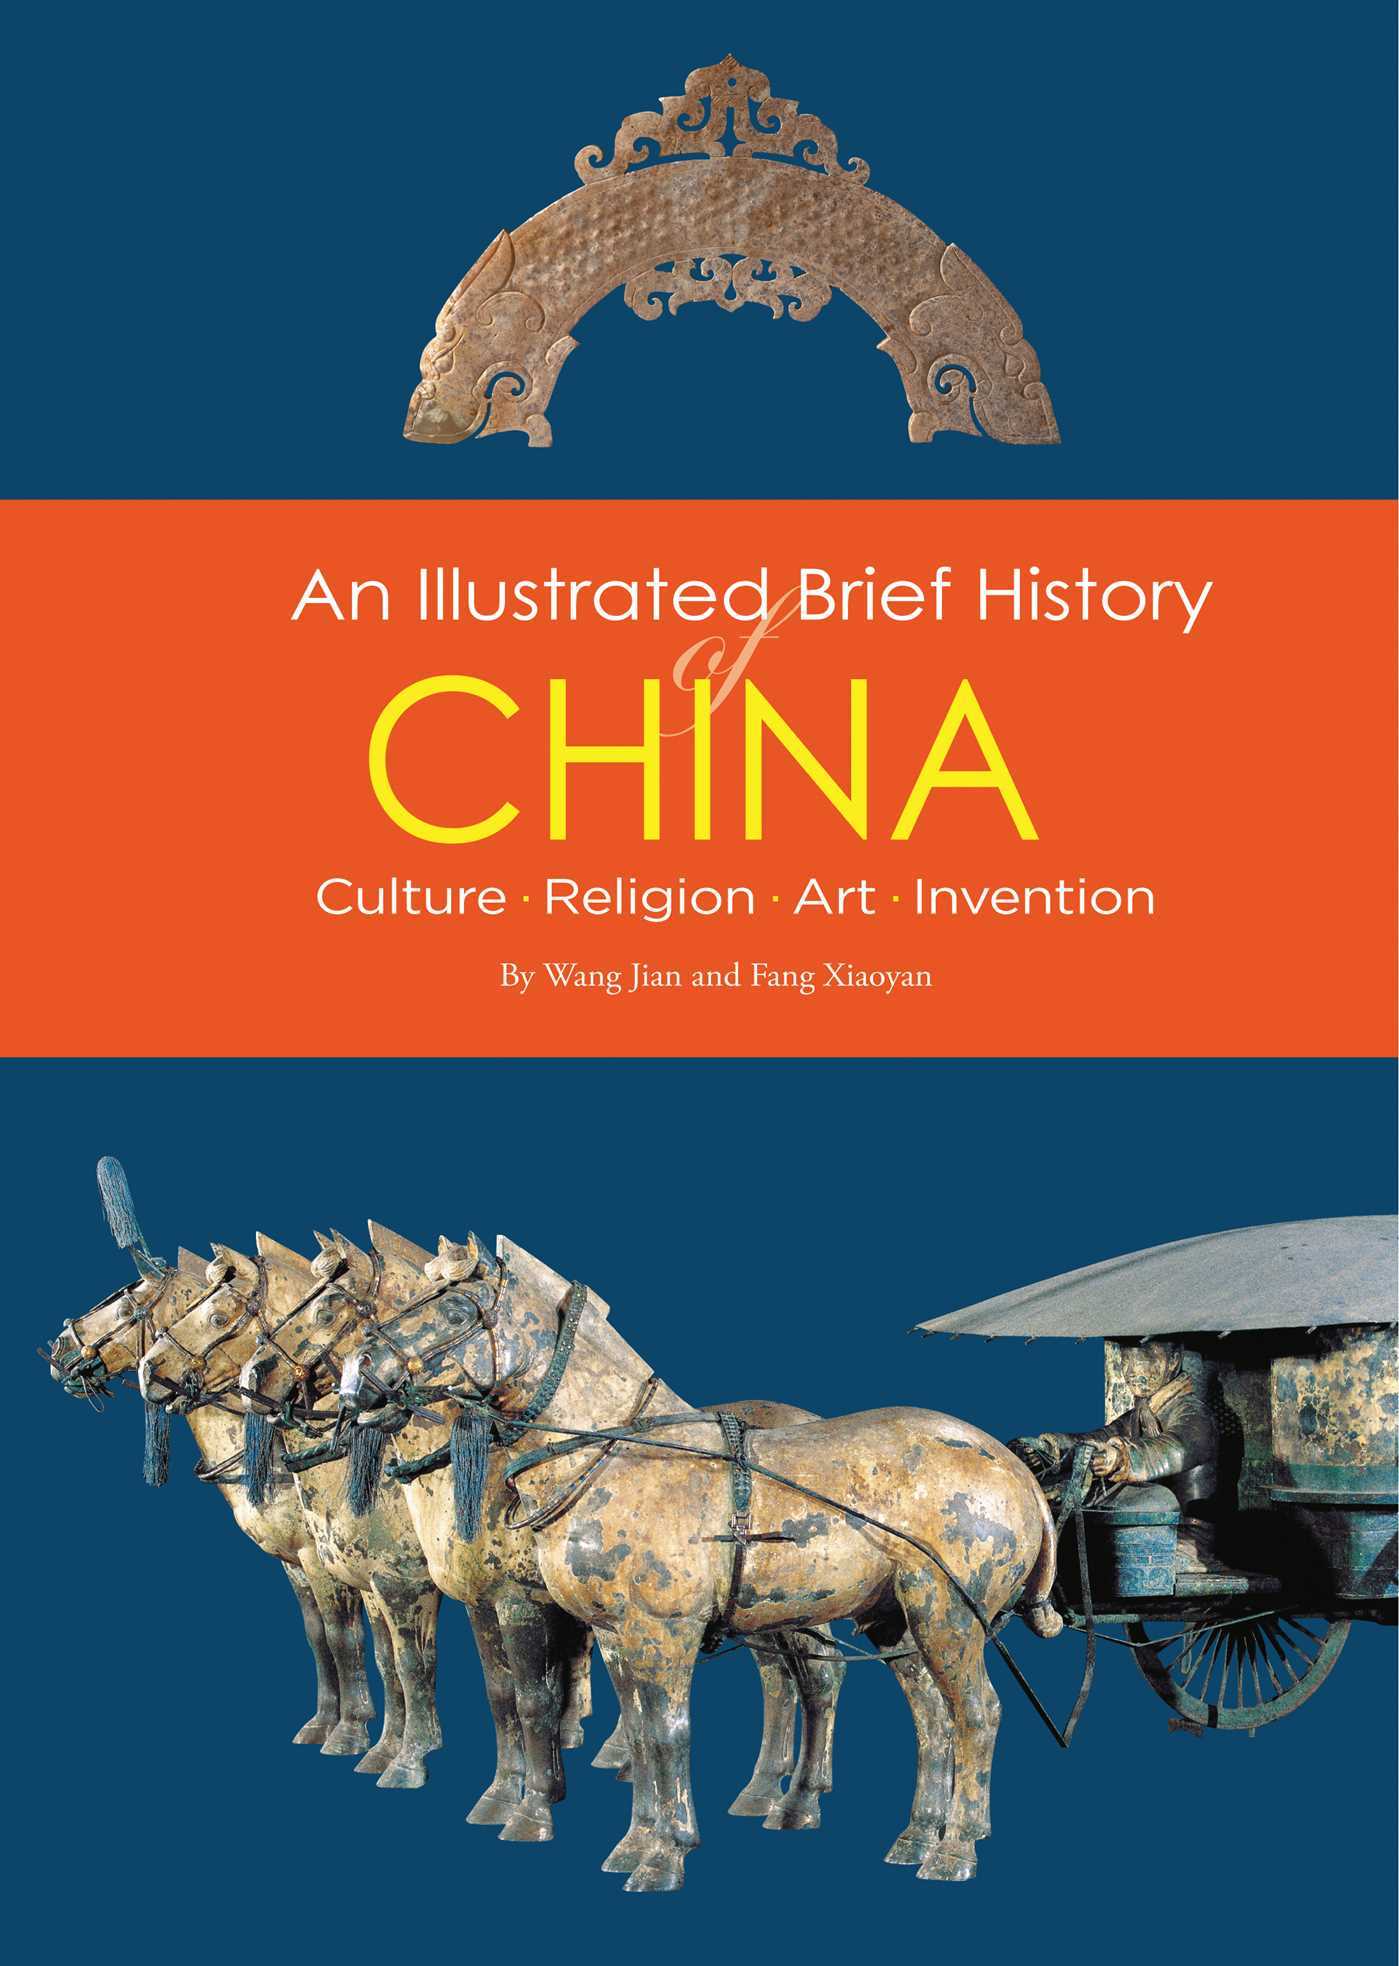 An illustrated brief history of China culture, religion, art, invention